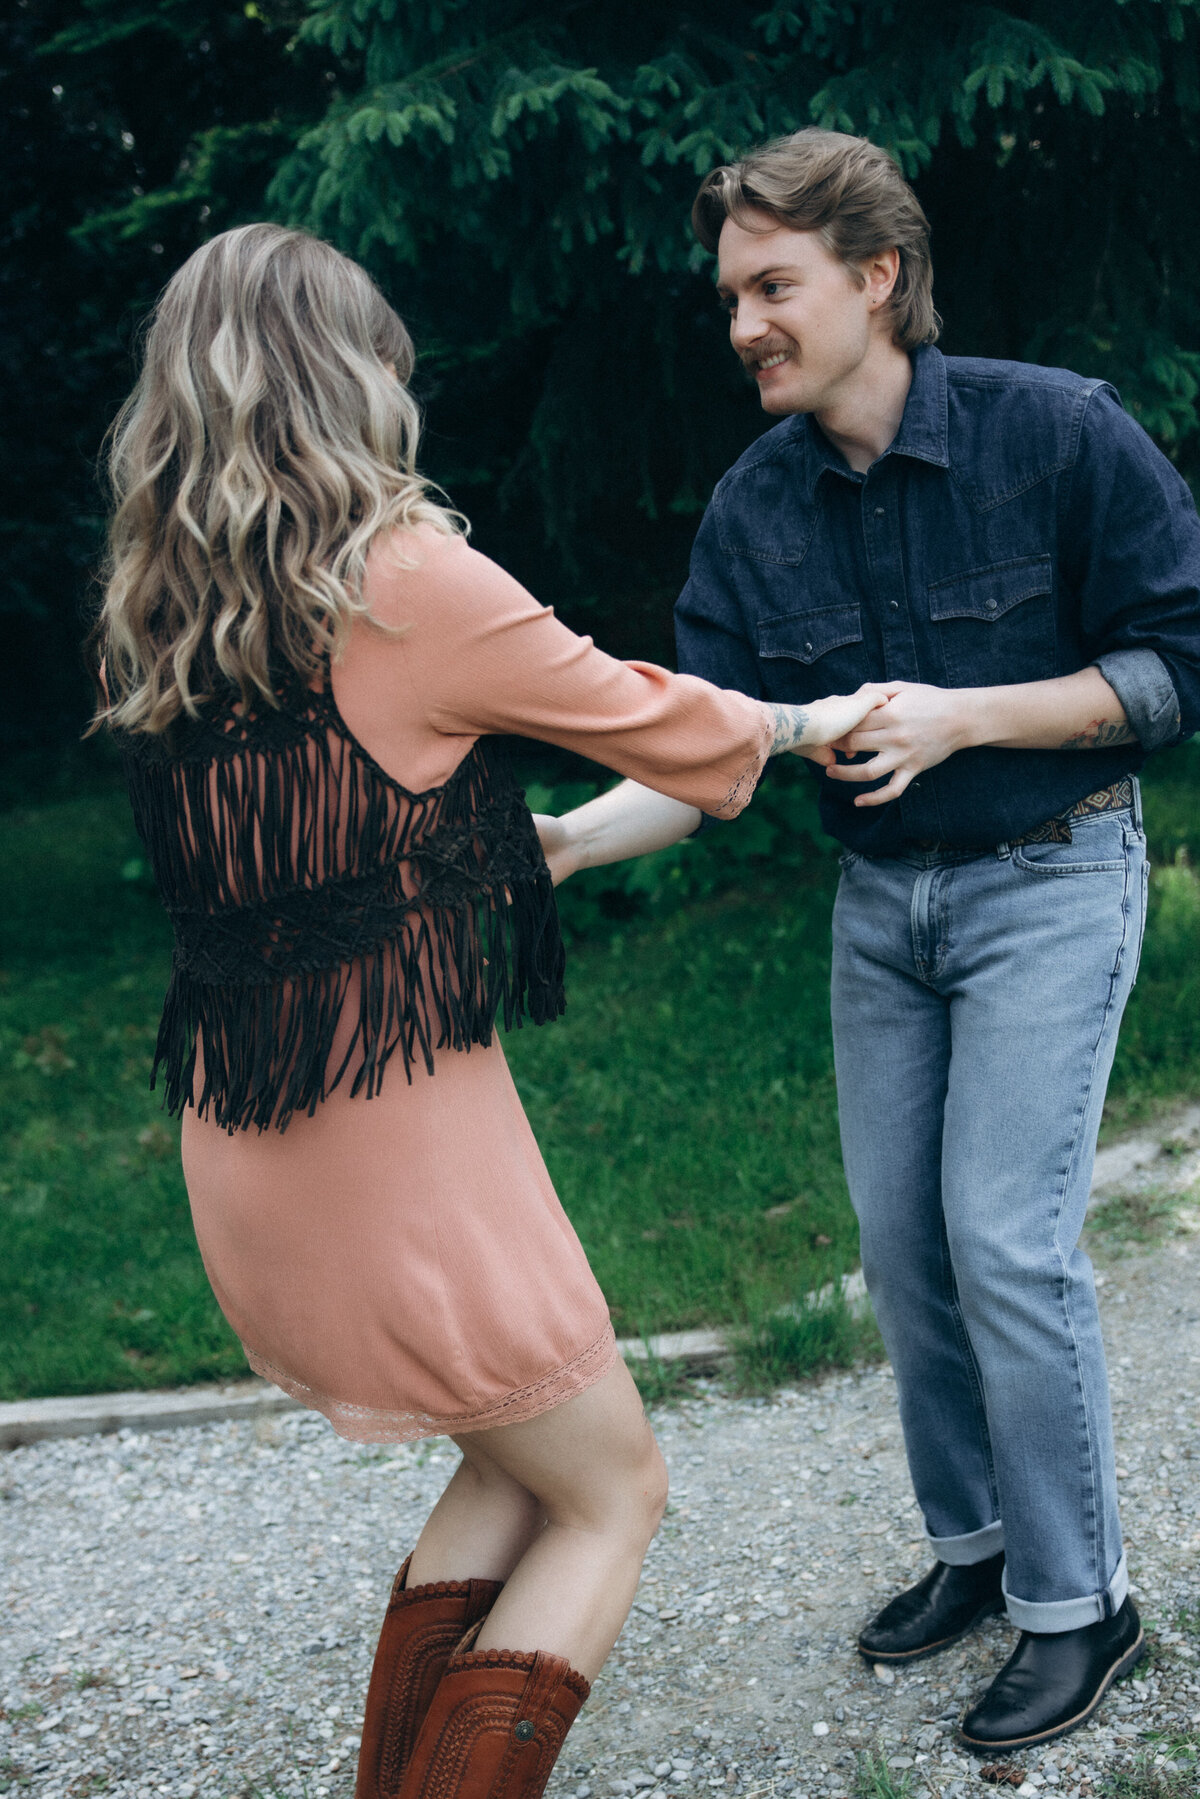 vpc-couples-vintage-cabin-shoot-10